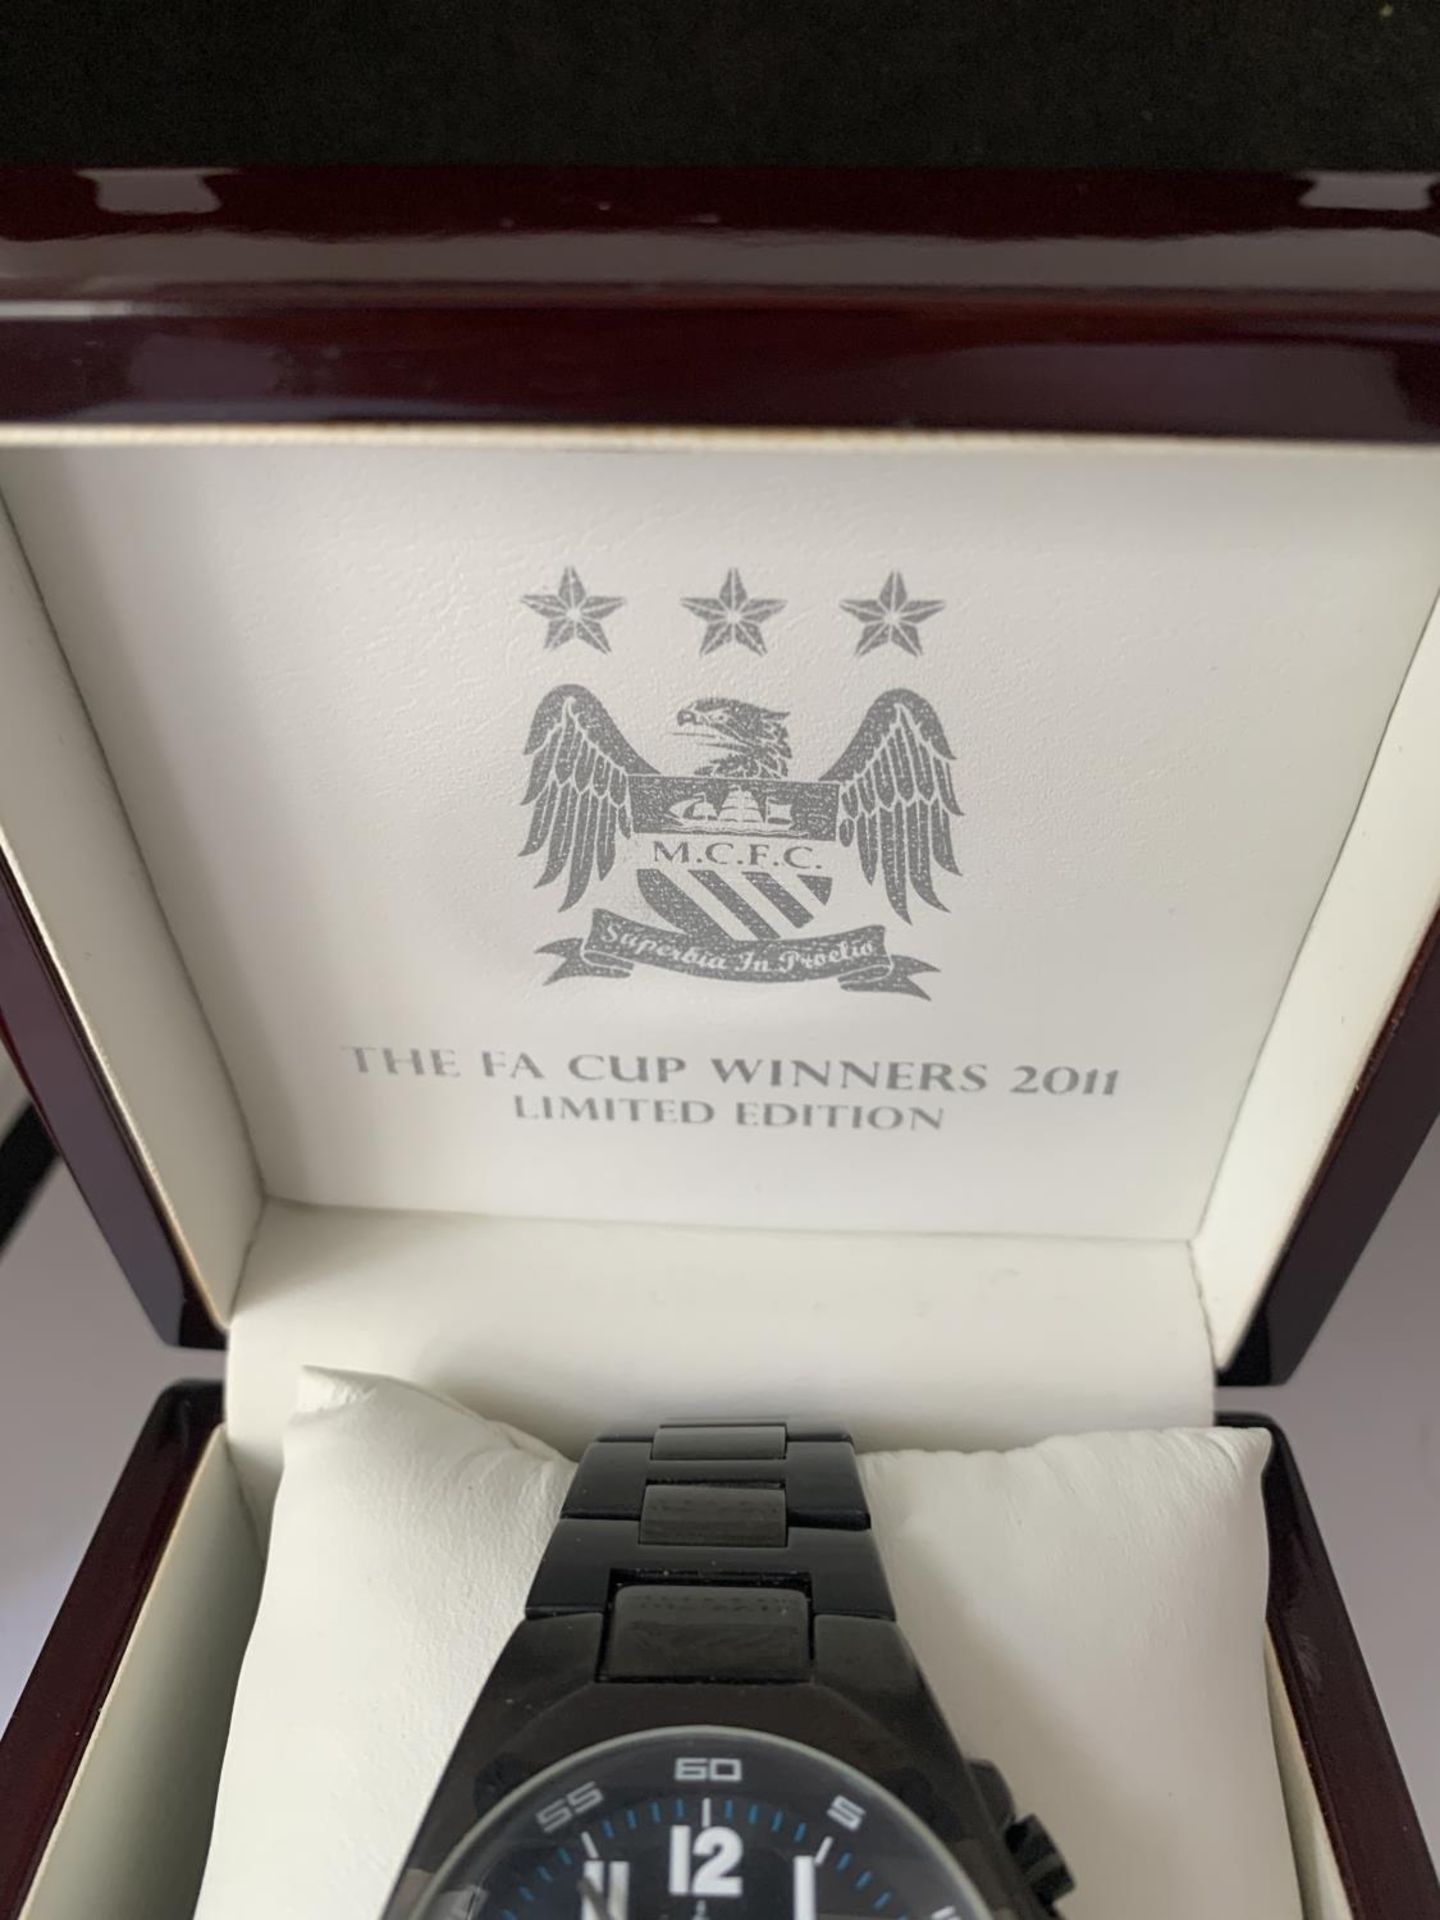 A MANCHESTER CITY FA CUP WINNERS 2011 LIMITED EDITION CHRONOGRAPH WRIST WATCH IN A PRESENTATION - Image 2 of 3